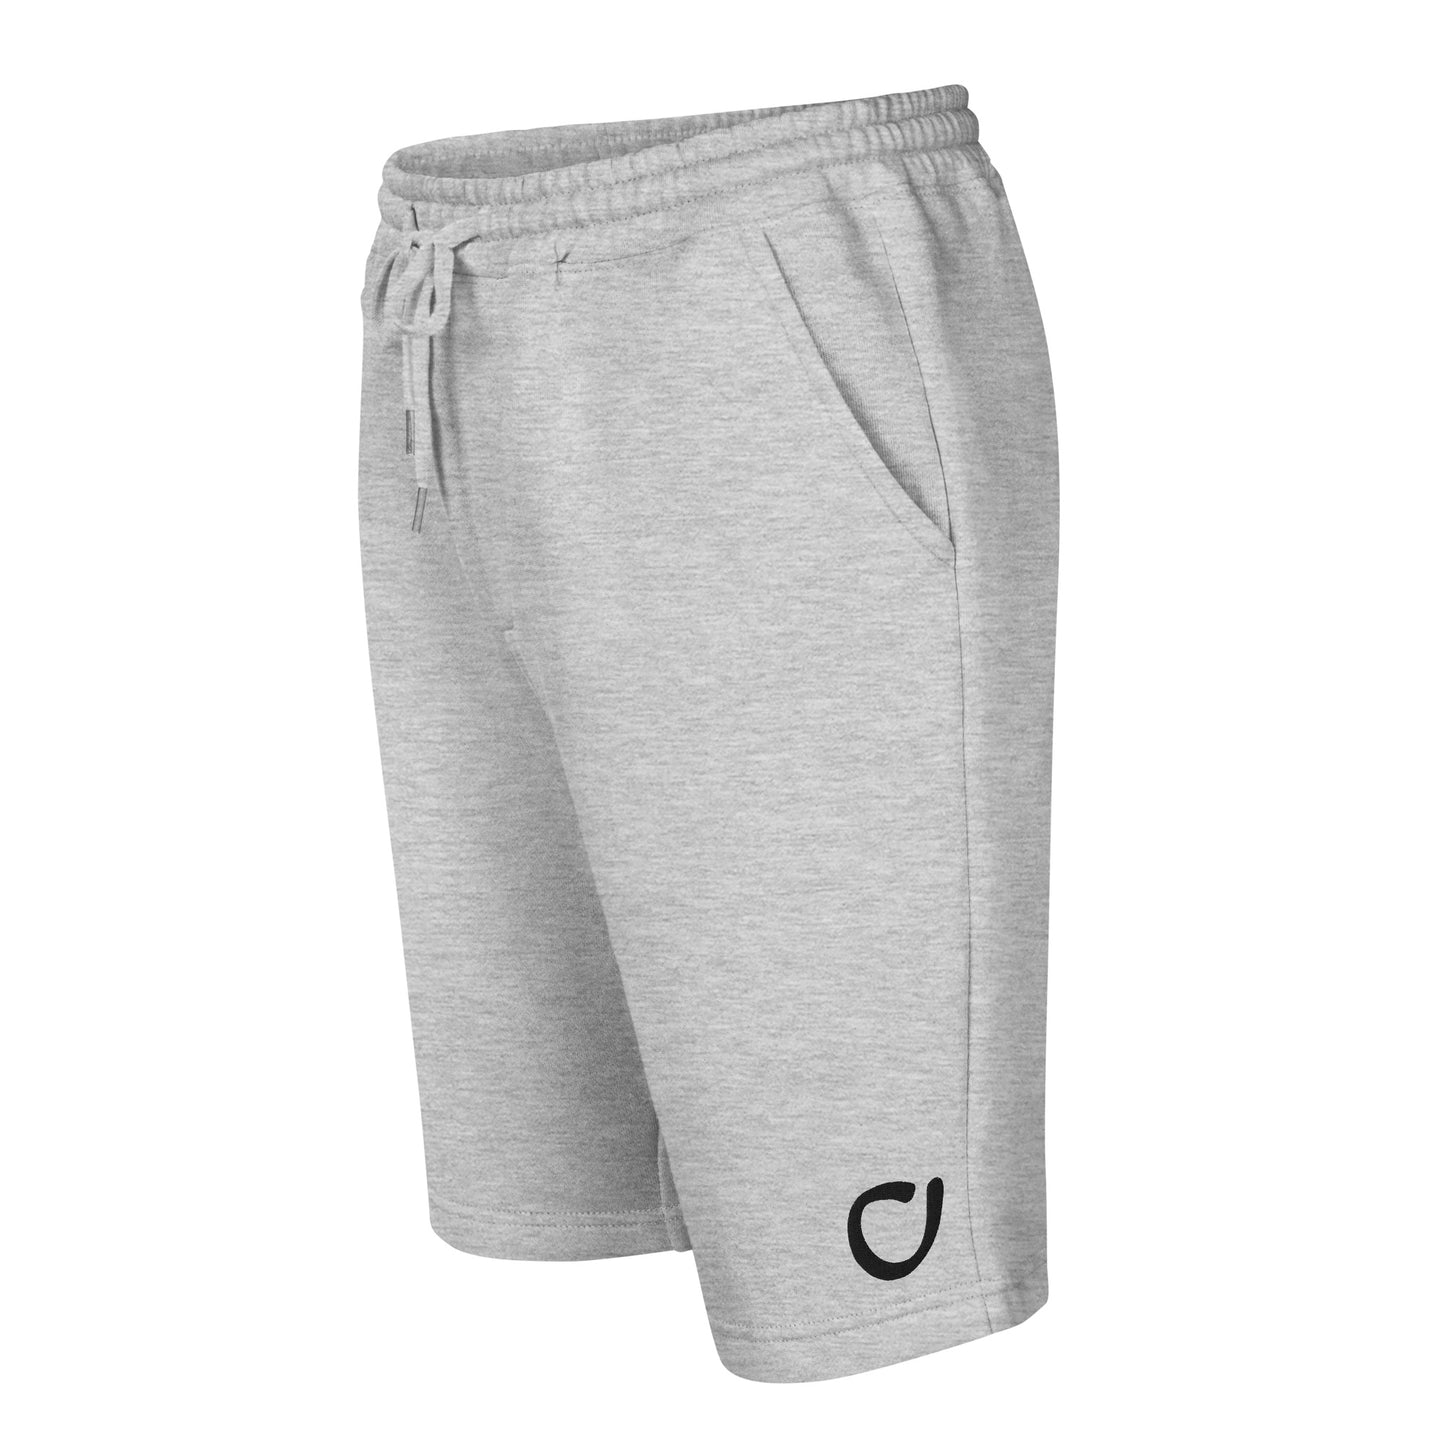 INITIALS Shorts by OLMO